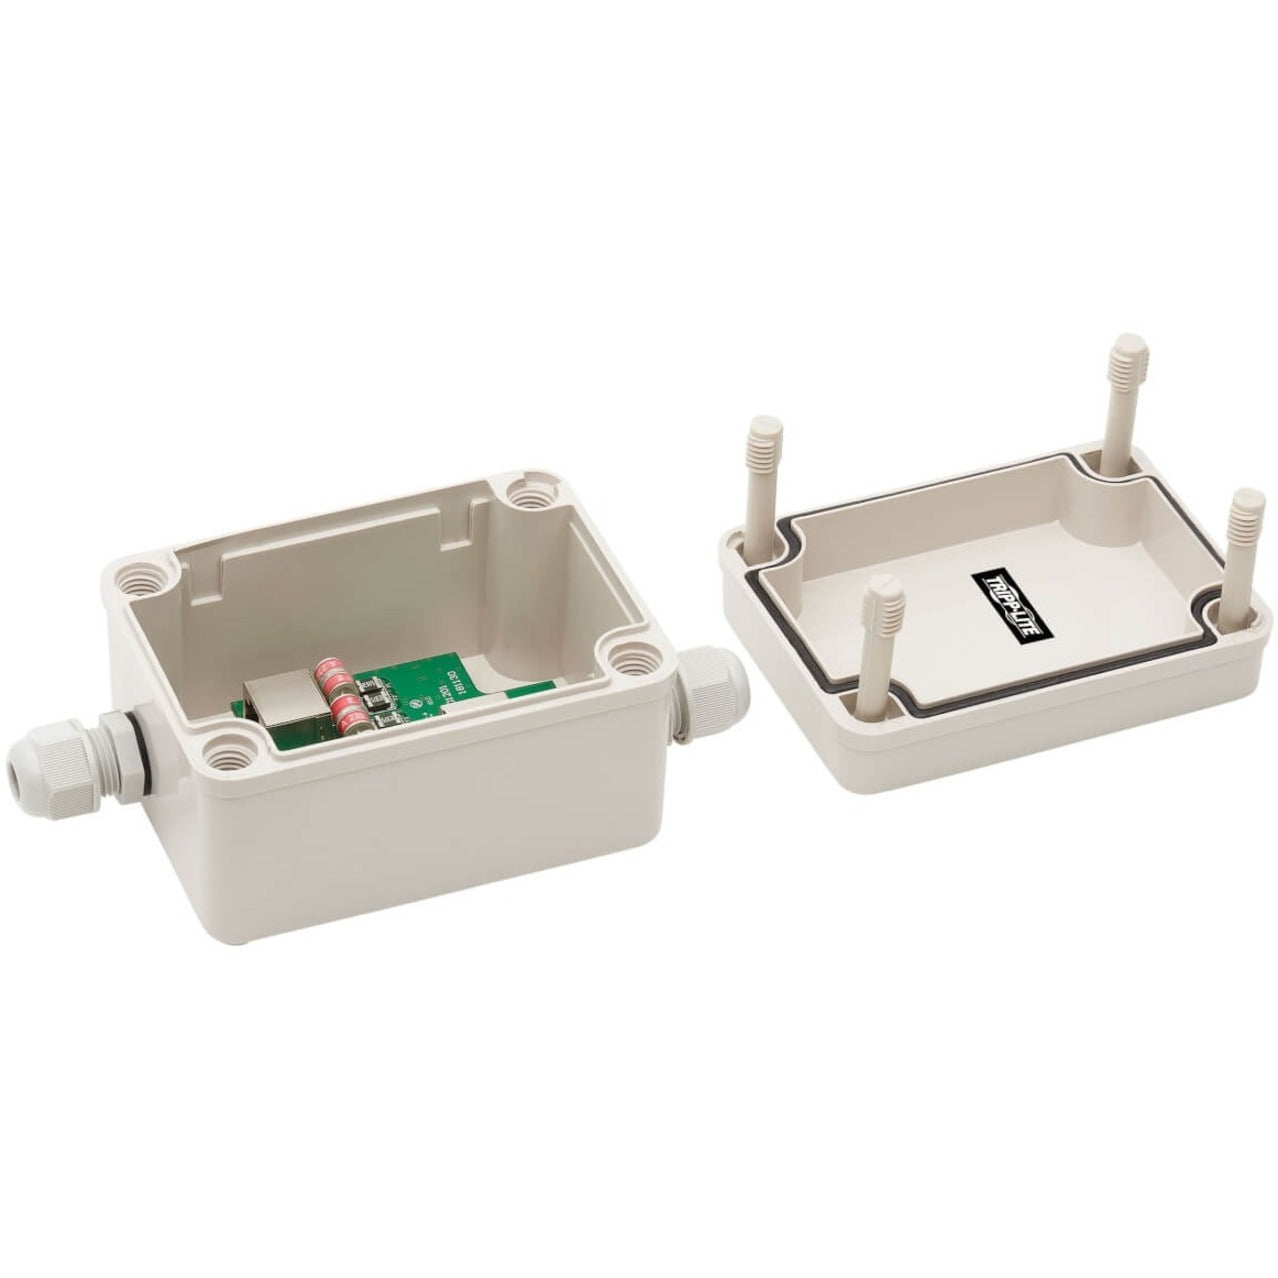 Tripp Lite Outdoor In-Line PoE Surge Protector IP66 Rated 1 Gbps Cat5e/6/6a IEC Compliant TAA